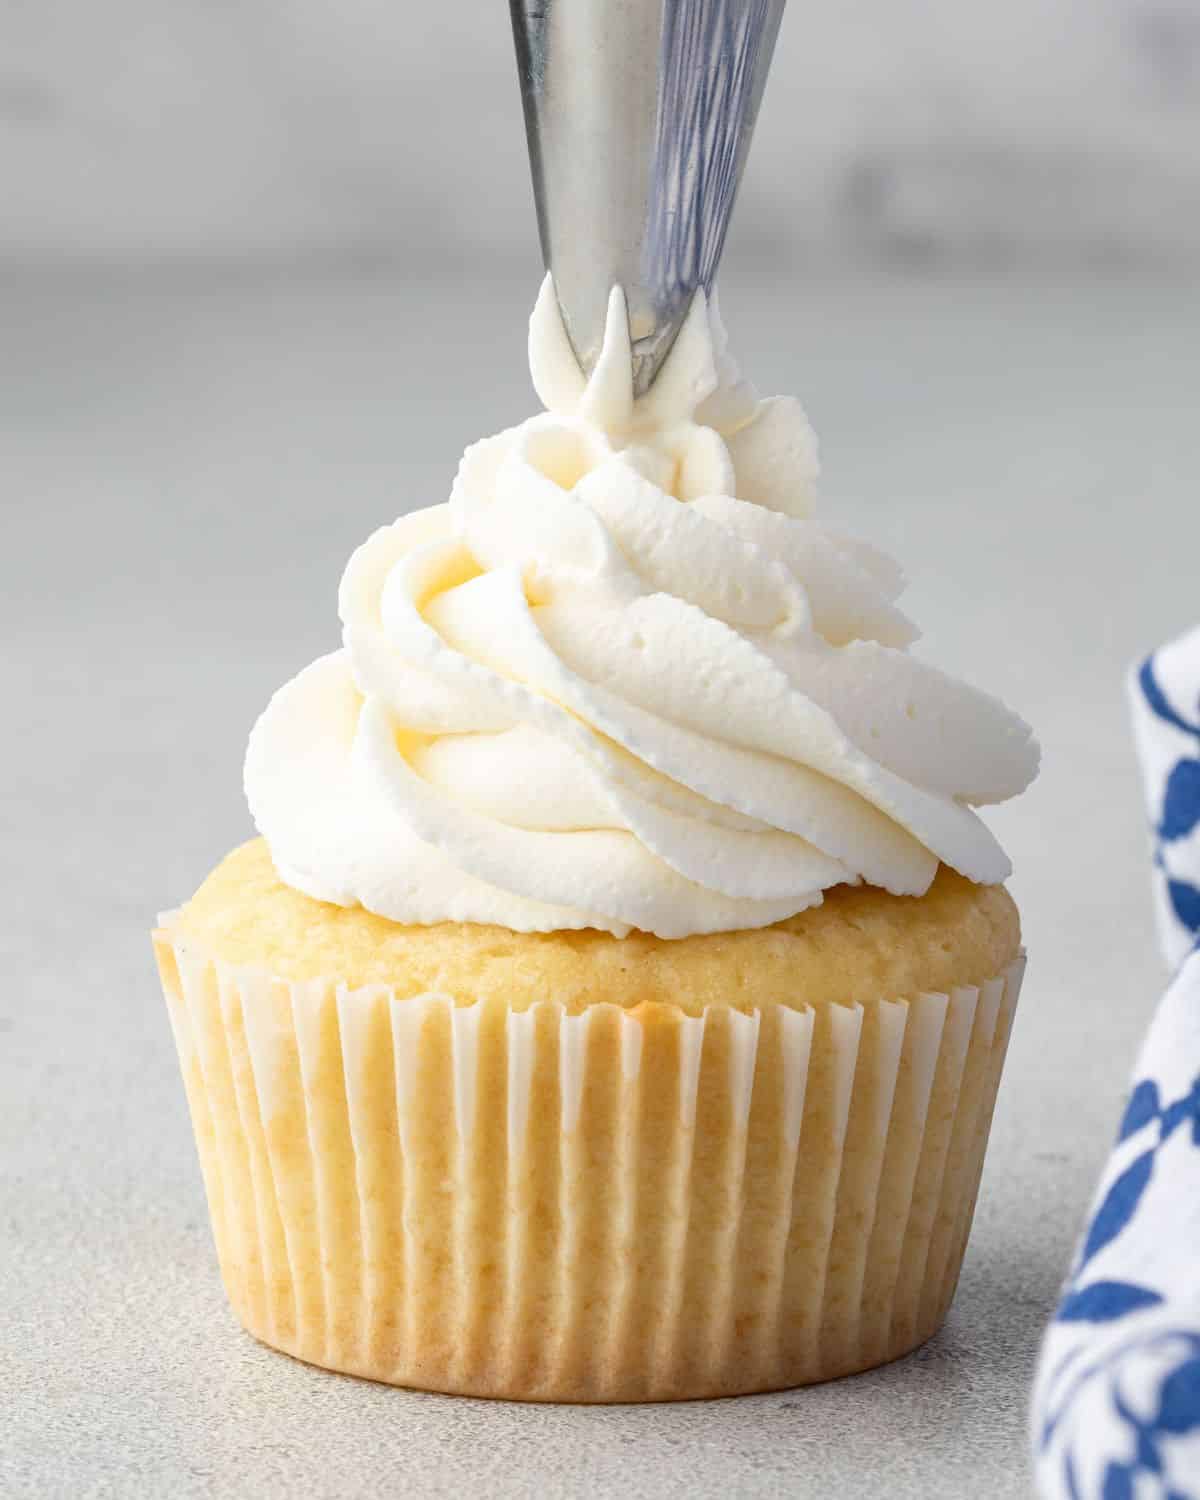 Piping whipped cream frosting onto cupcake.